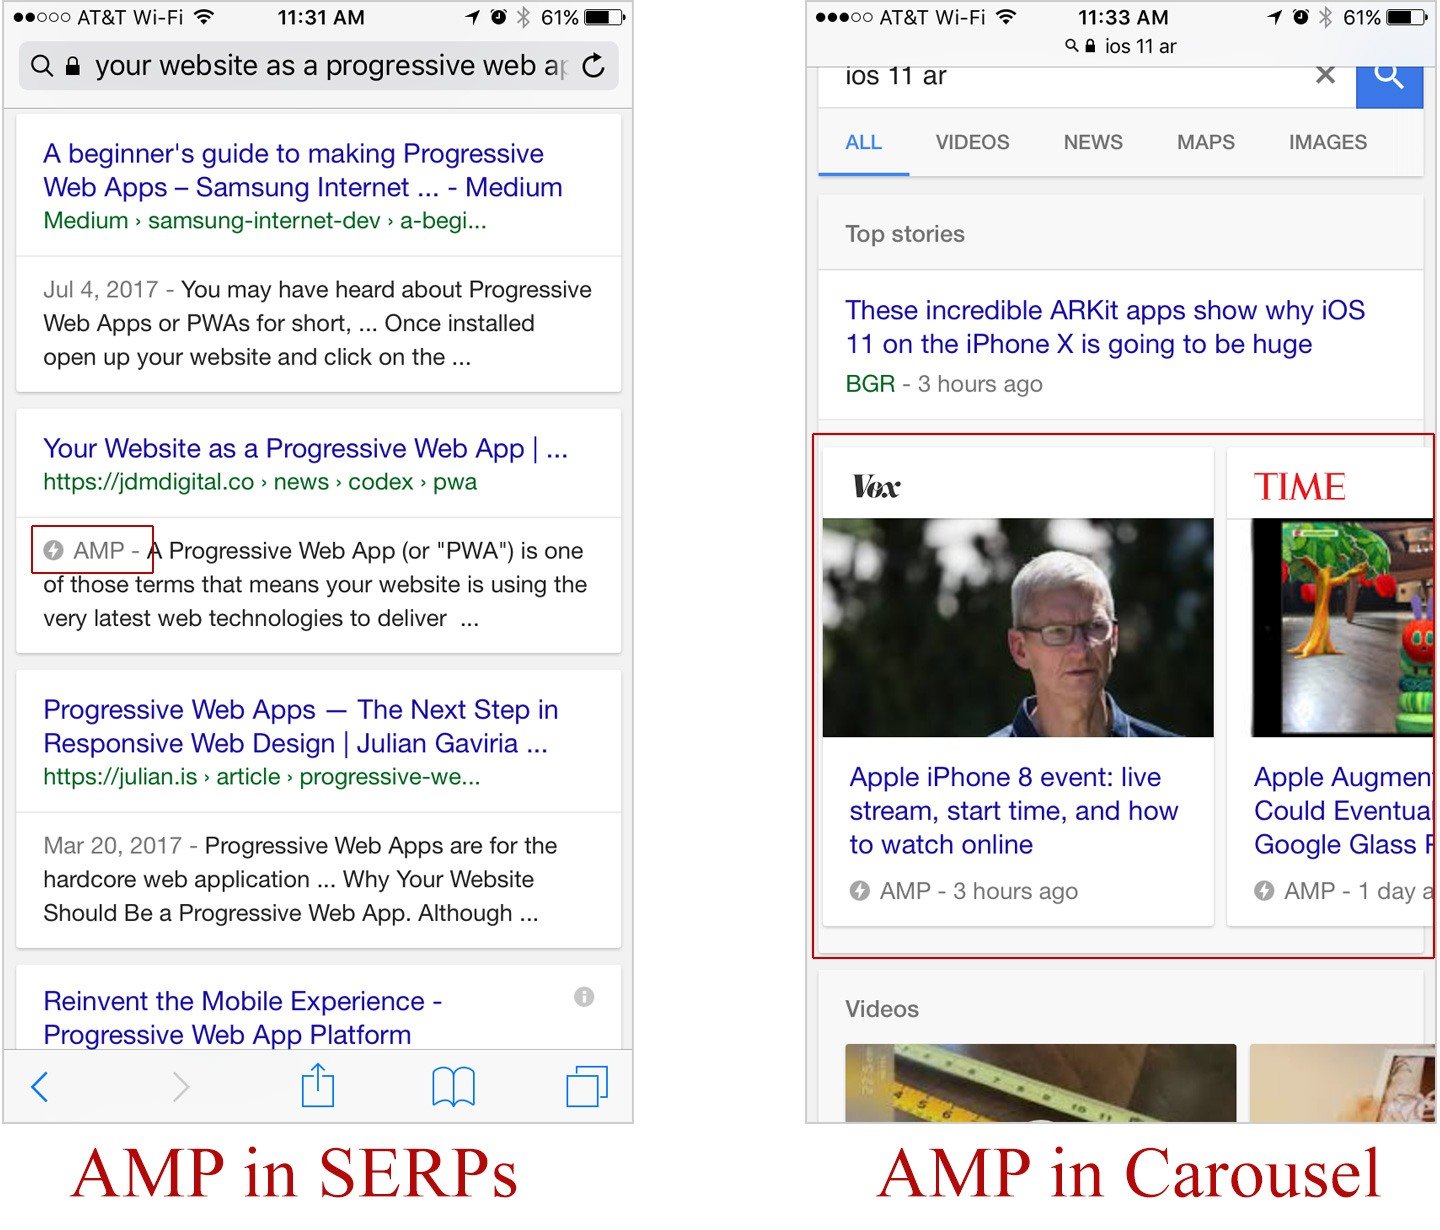 AMP Advantages in SERPs